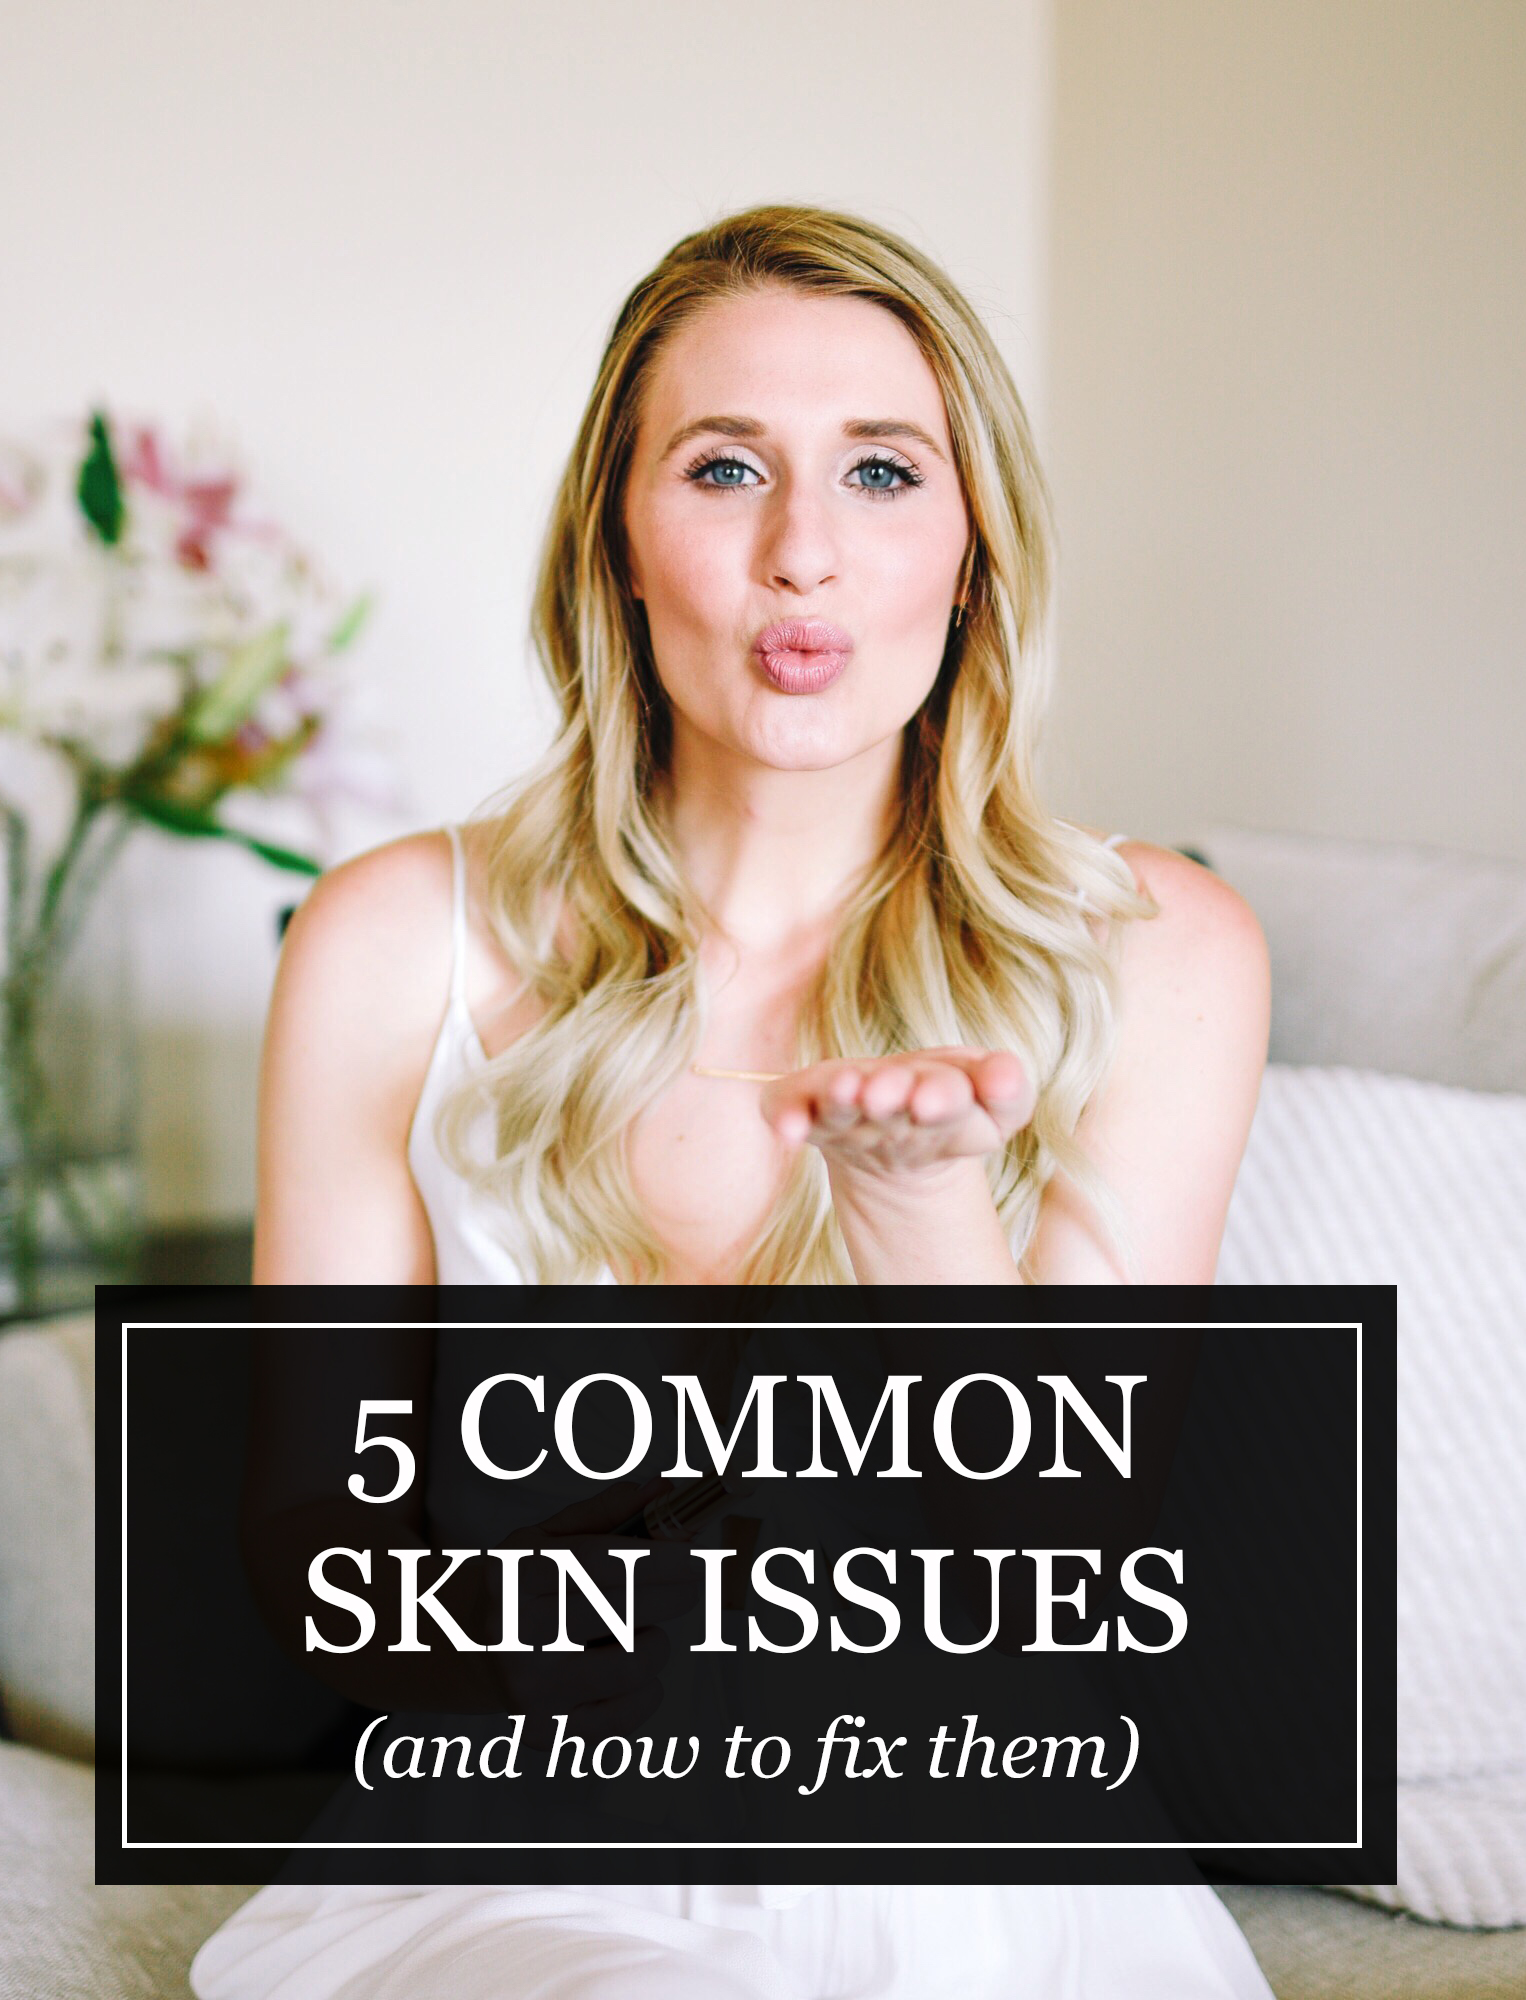 5 common skin issues and how to fix them by popular Chicago beauty blogger Visions of Vogue